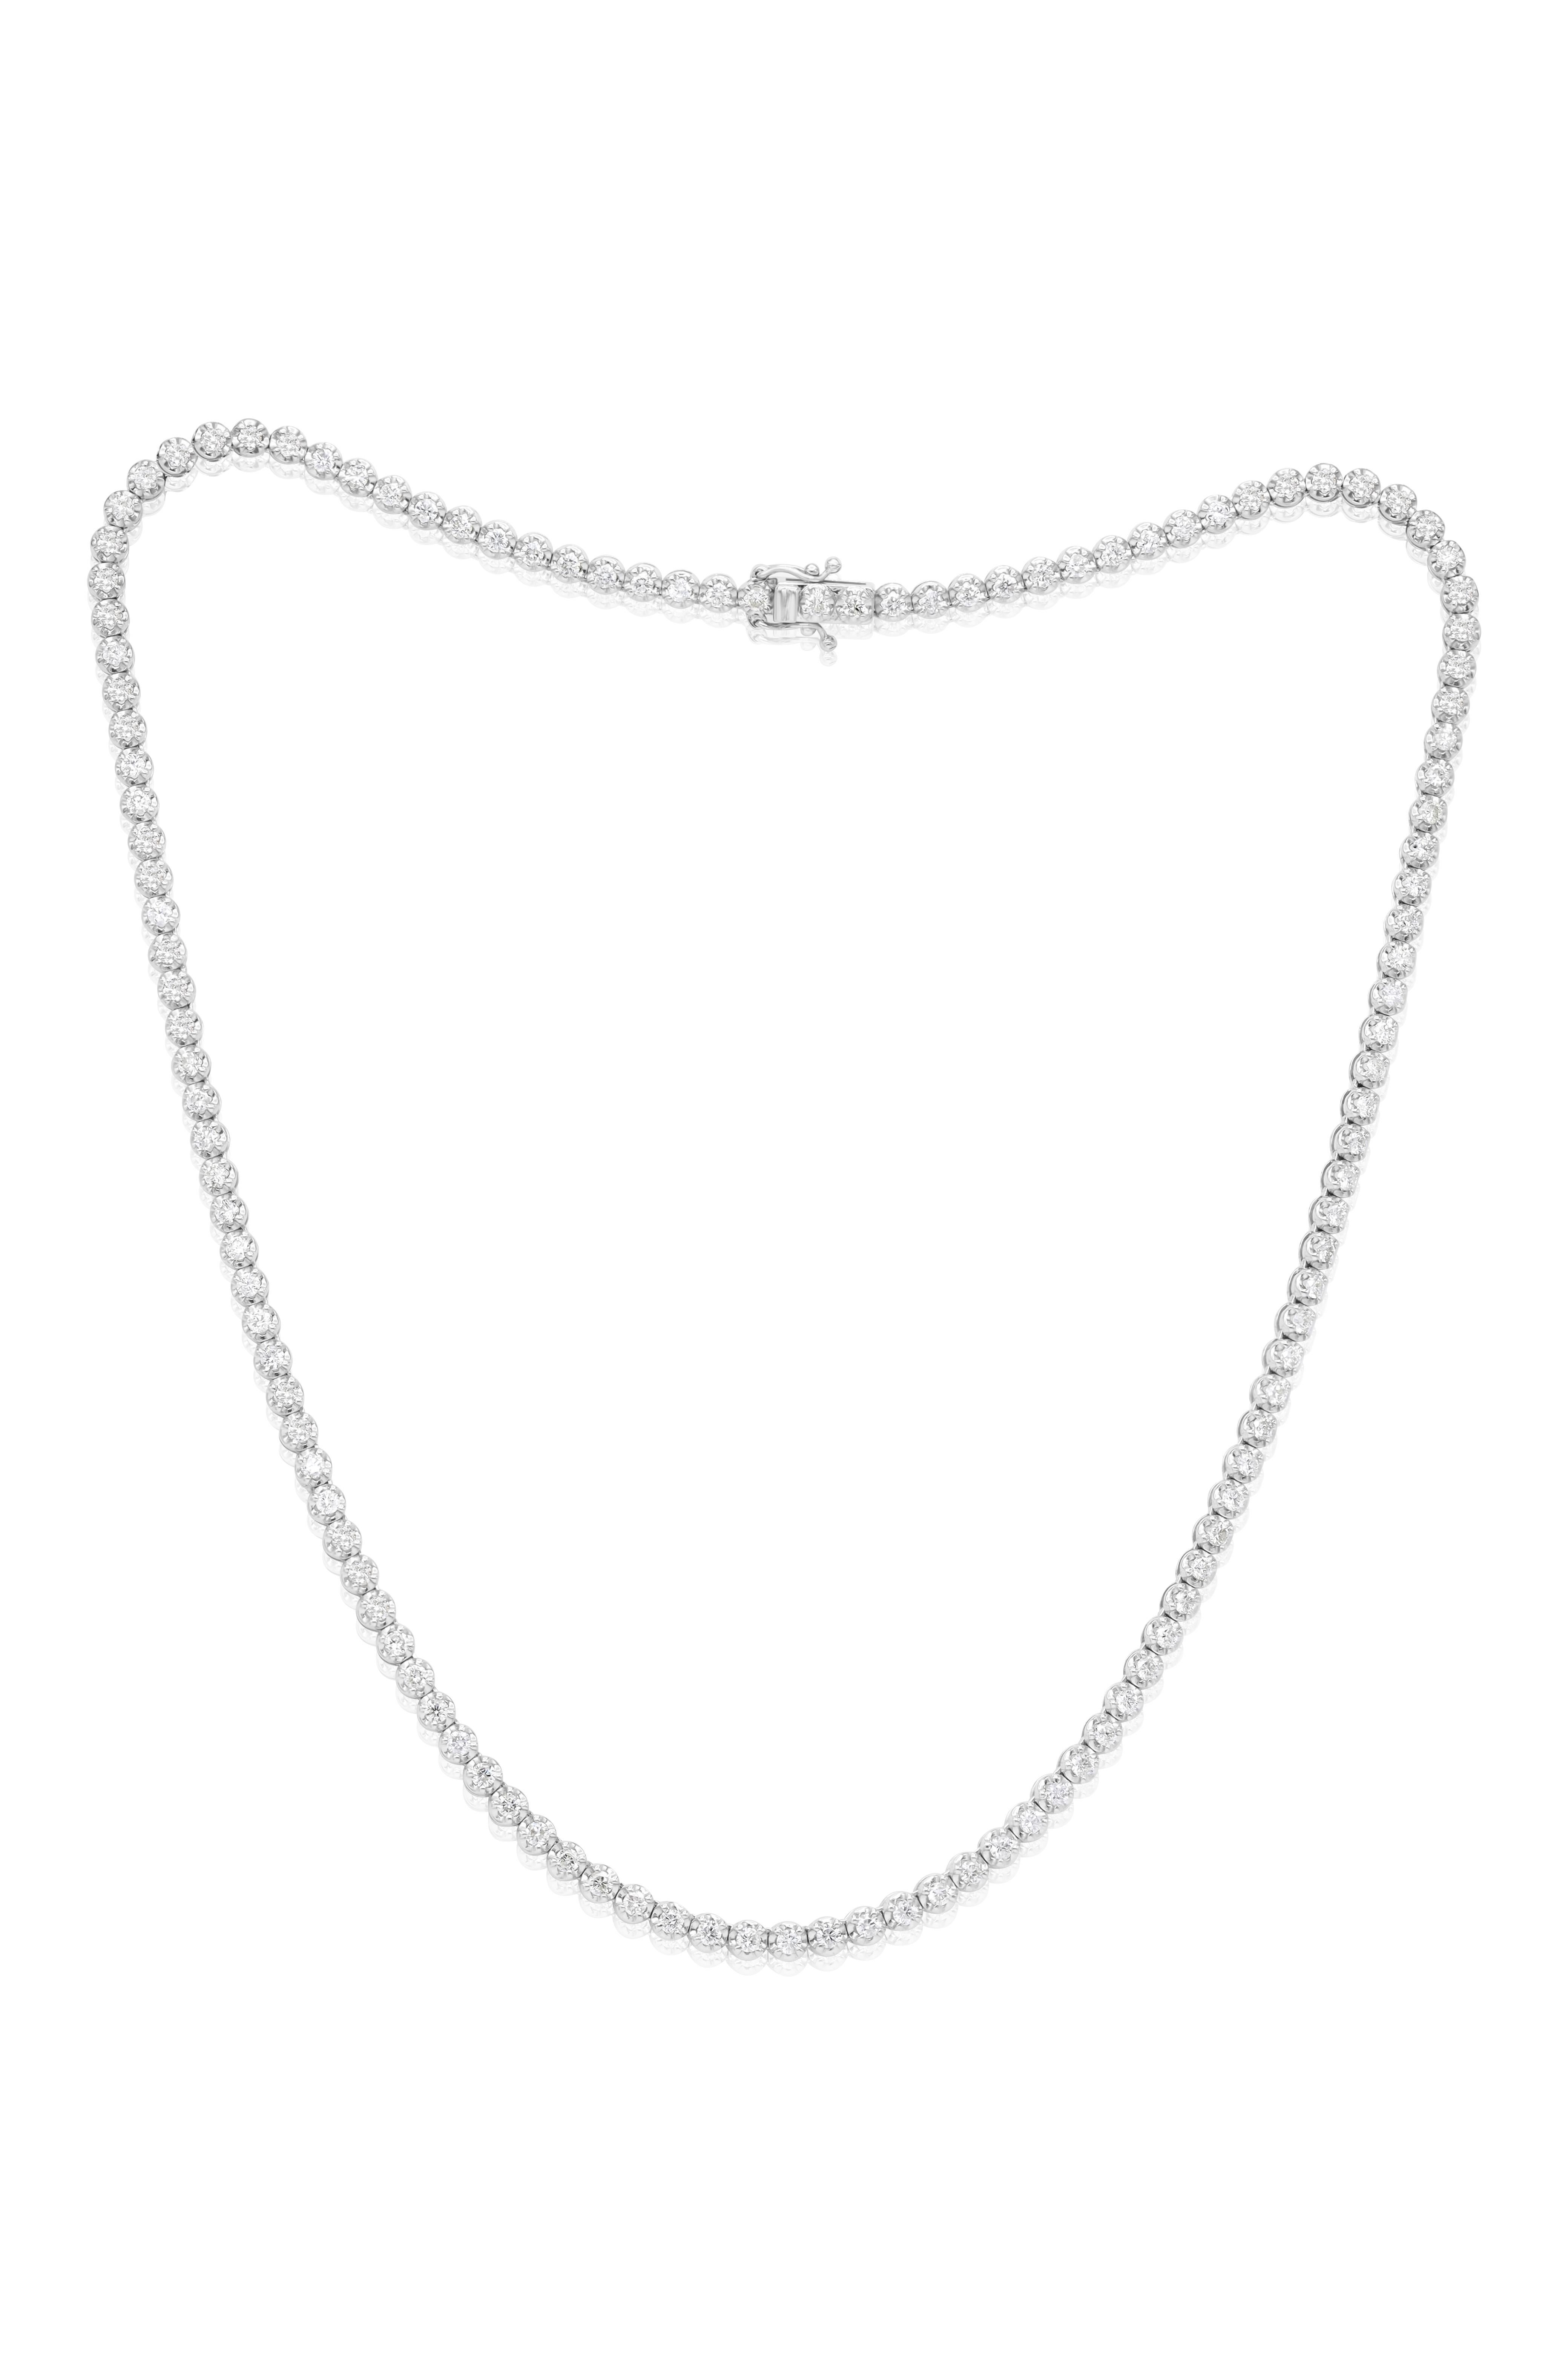 Modern Diana M. Custom 5.00 cts Round Diamond 14k White Gold  Tennis Necklace  For Sale